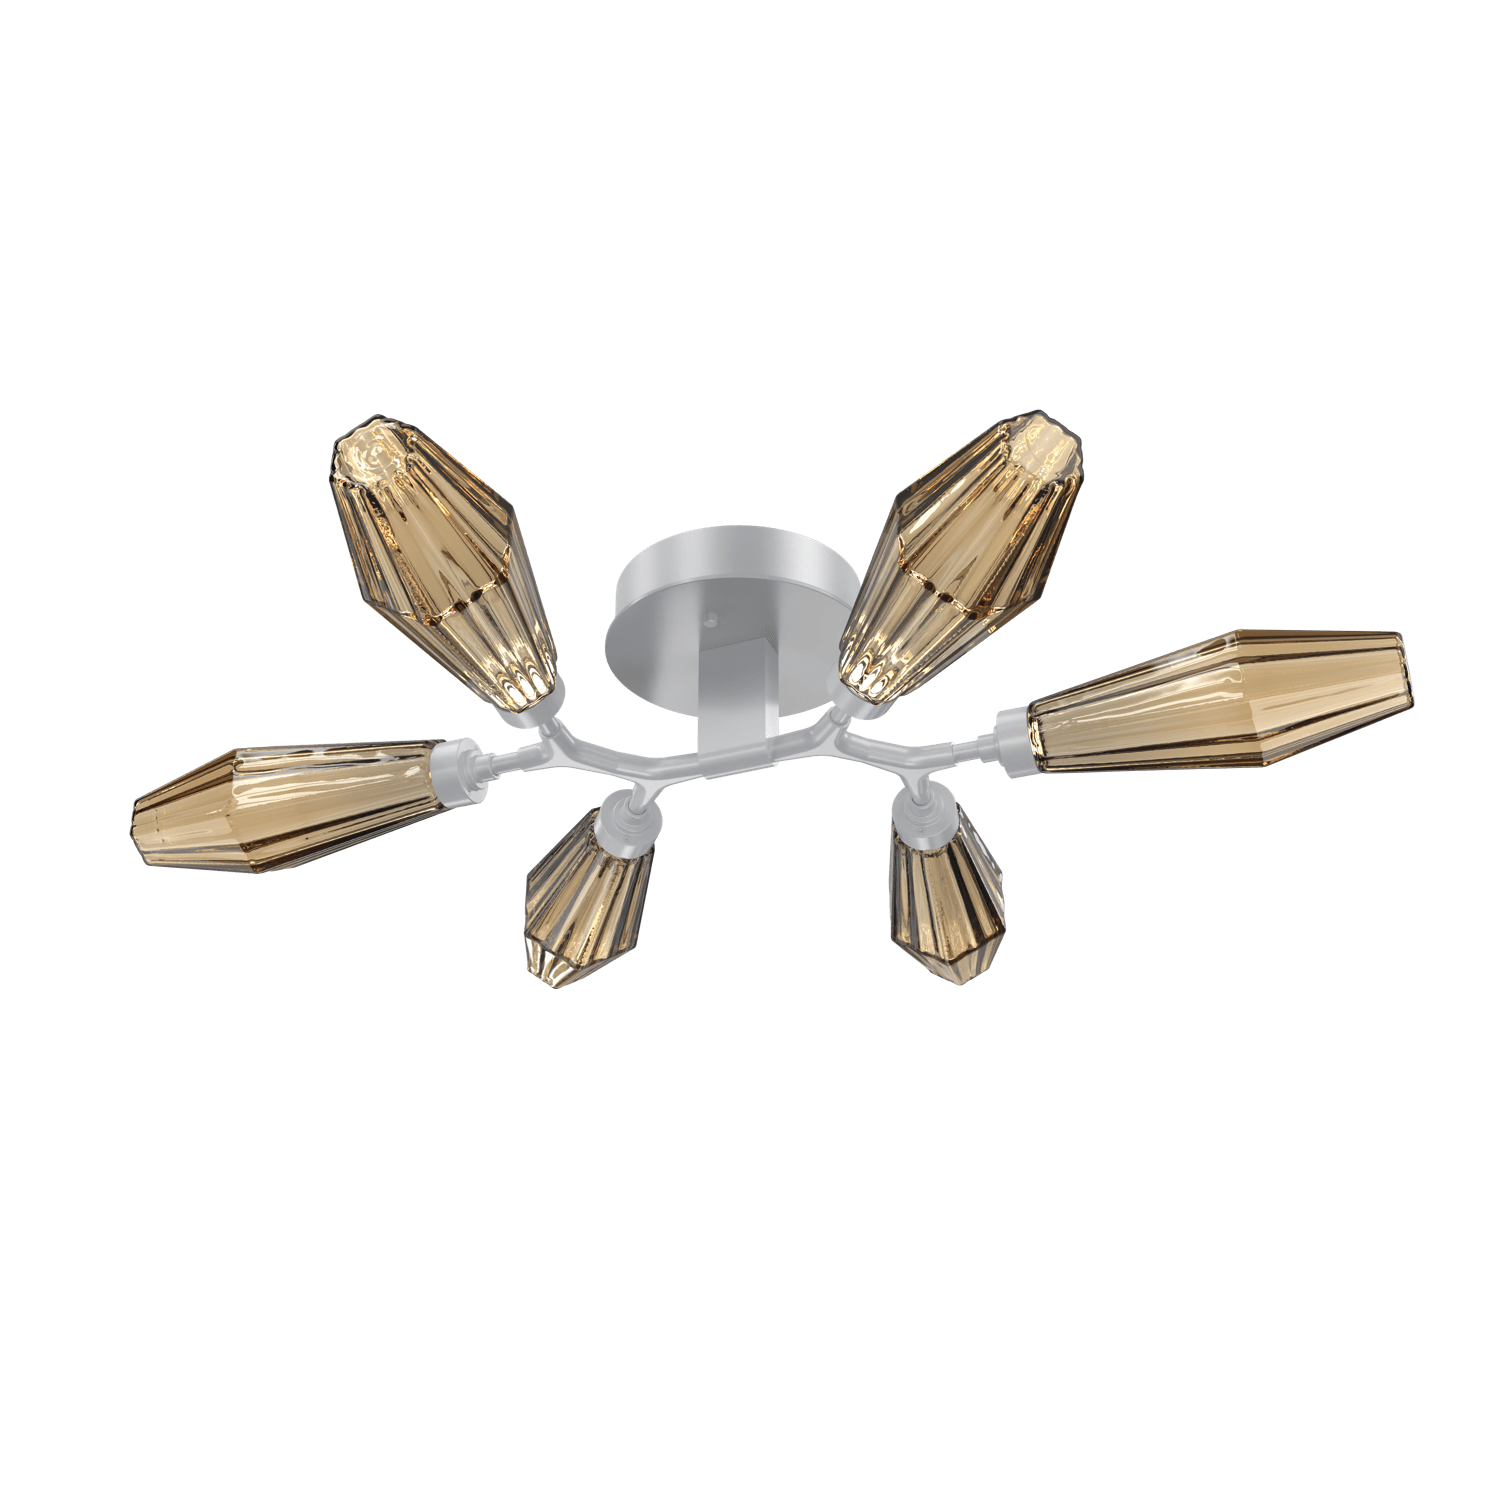 CLB0049-01-CS-RB-Hammerton-Studio-Aalto-6-light-organic-flush-mount-light-with-classic-silver-finish-and-optic-ribbed-bronze-glass-shades-and-LED-lamping